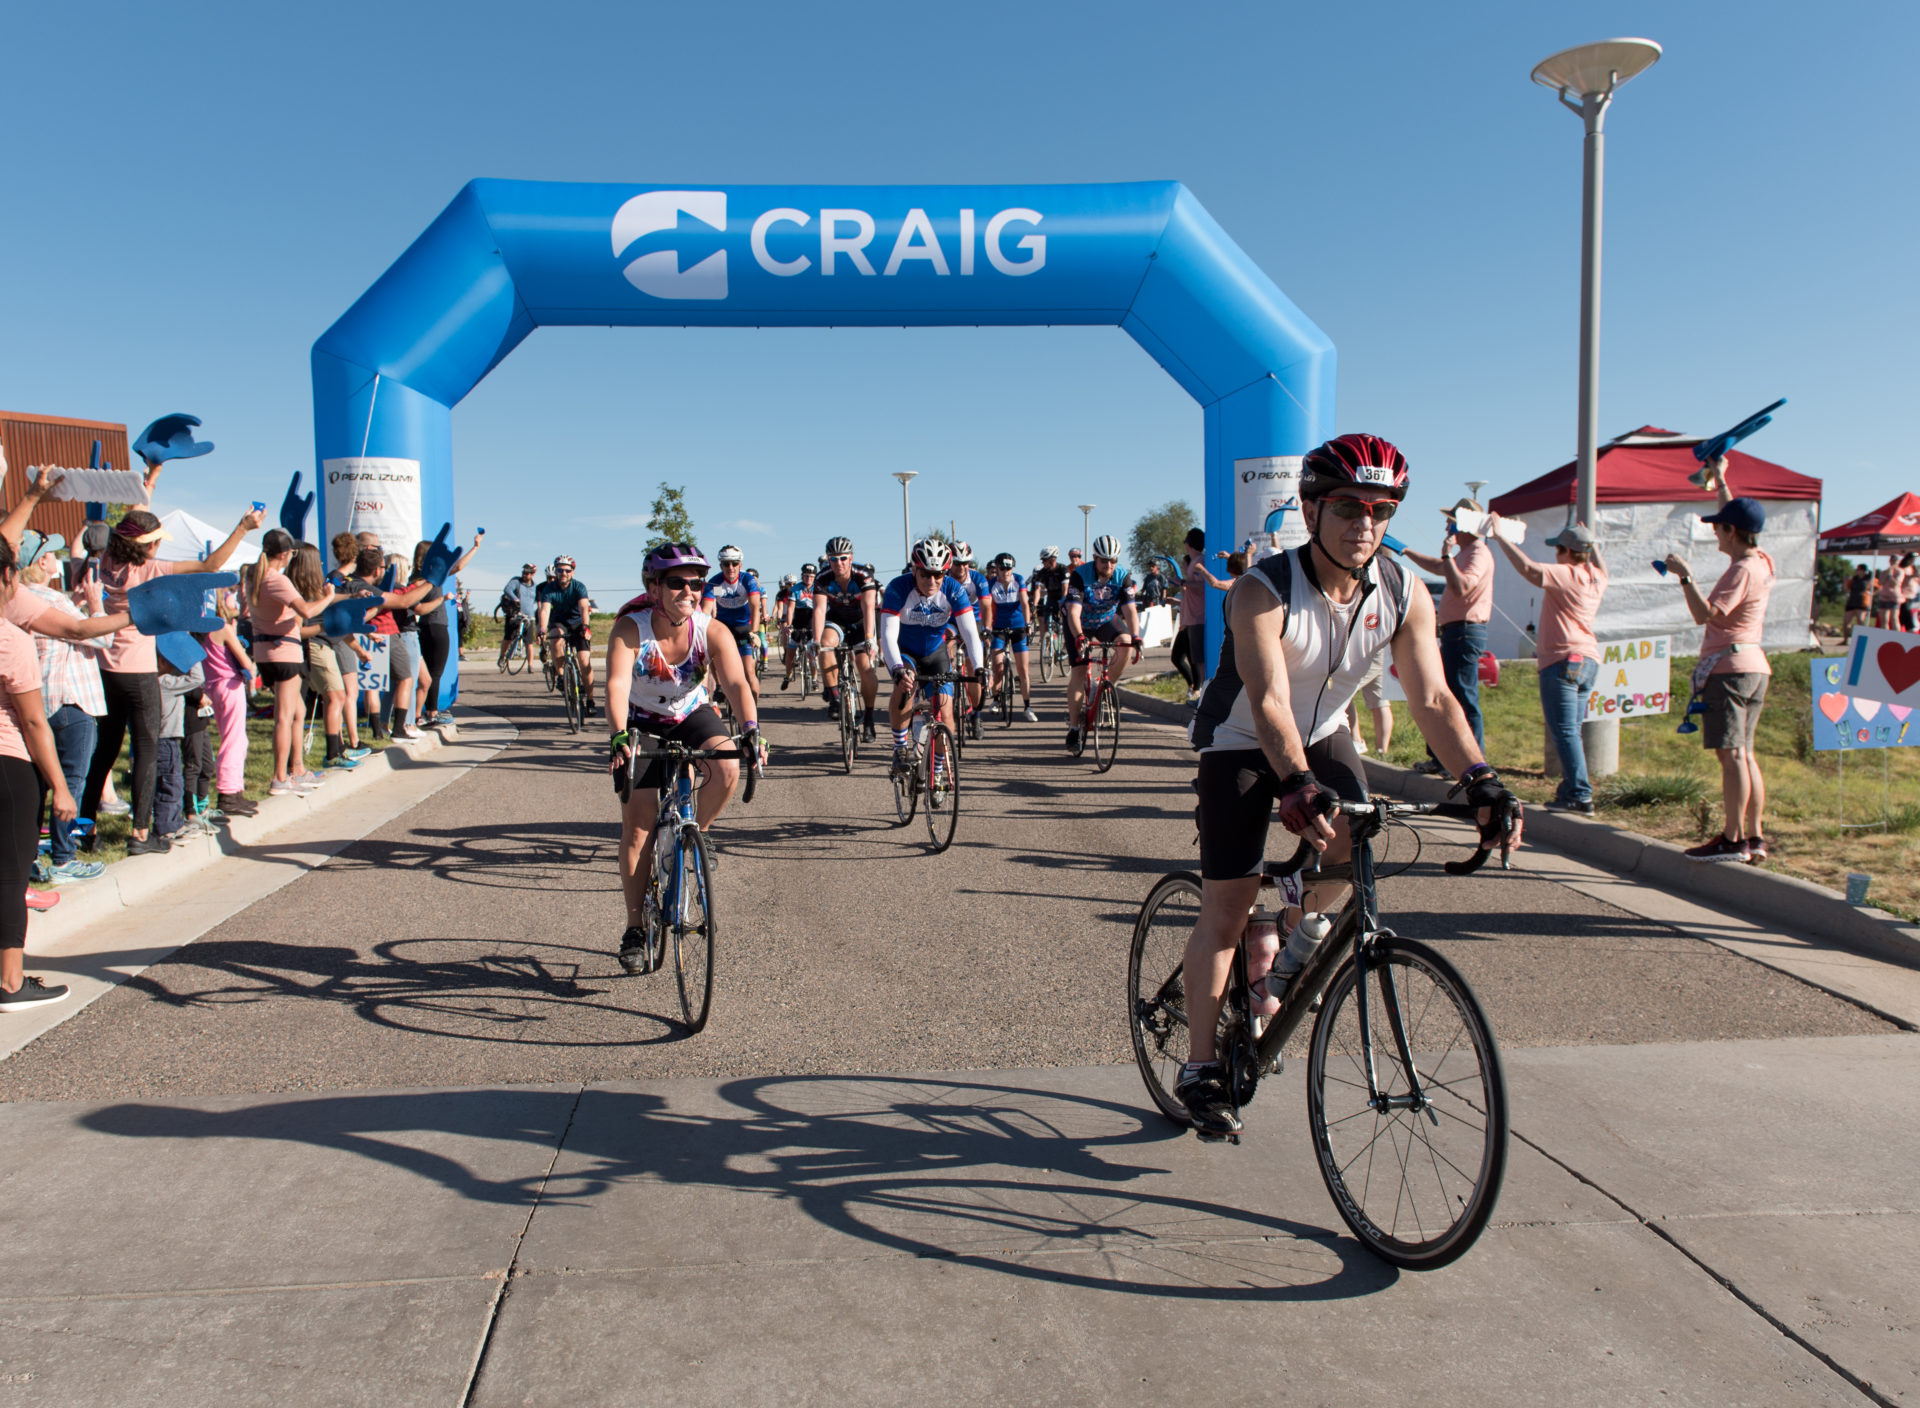 Bicyclists cross the finish line of a ride coming toward the camera. They are on a paved road. There is an inflatable arch above the road that says "Craig".